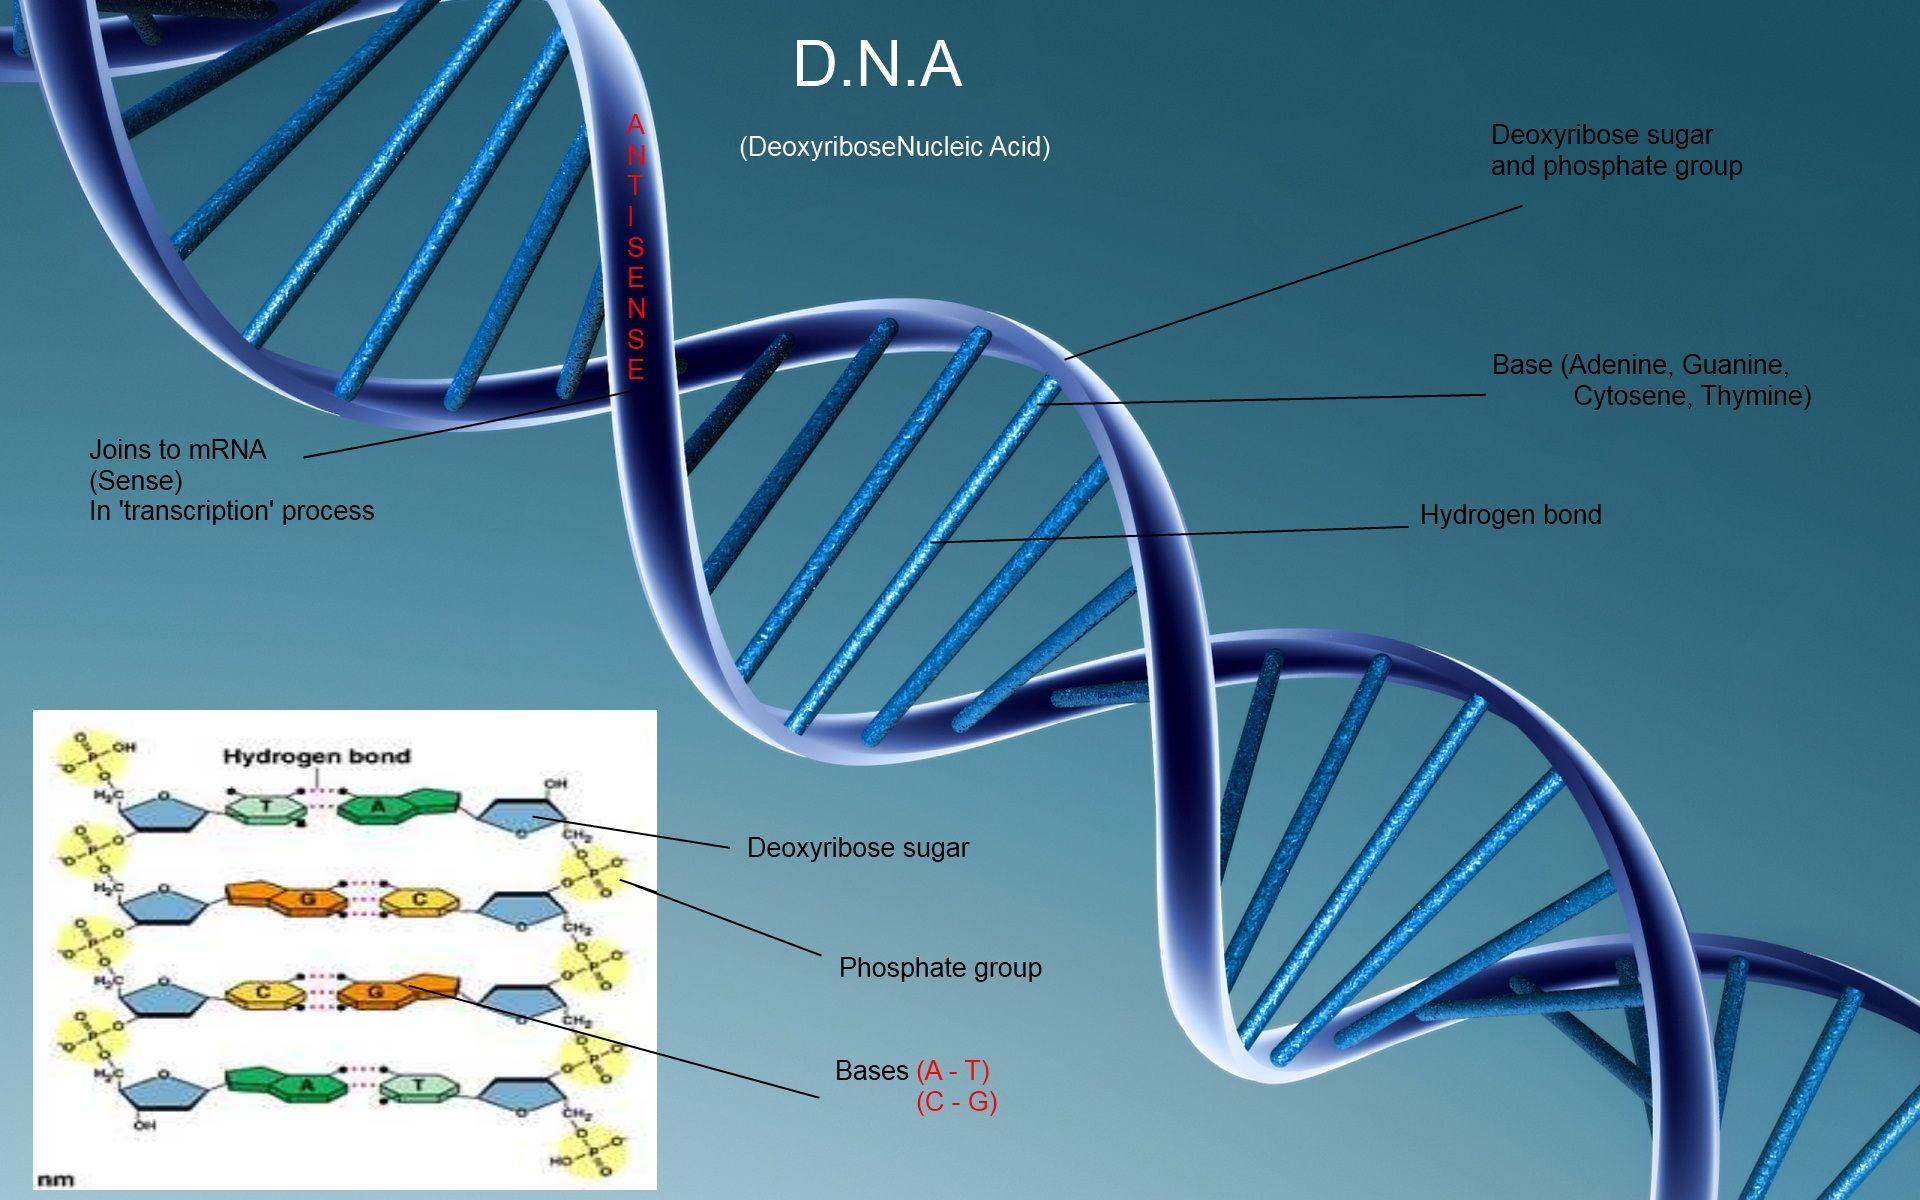 Download the DNA Structure Wallpaper, DNA Structure iPhone Wallpaper